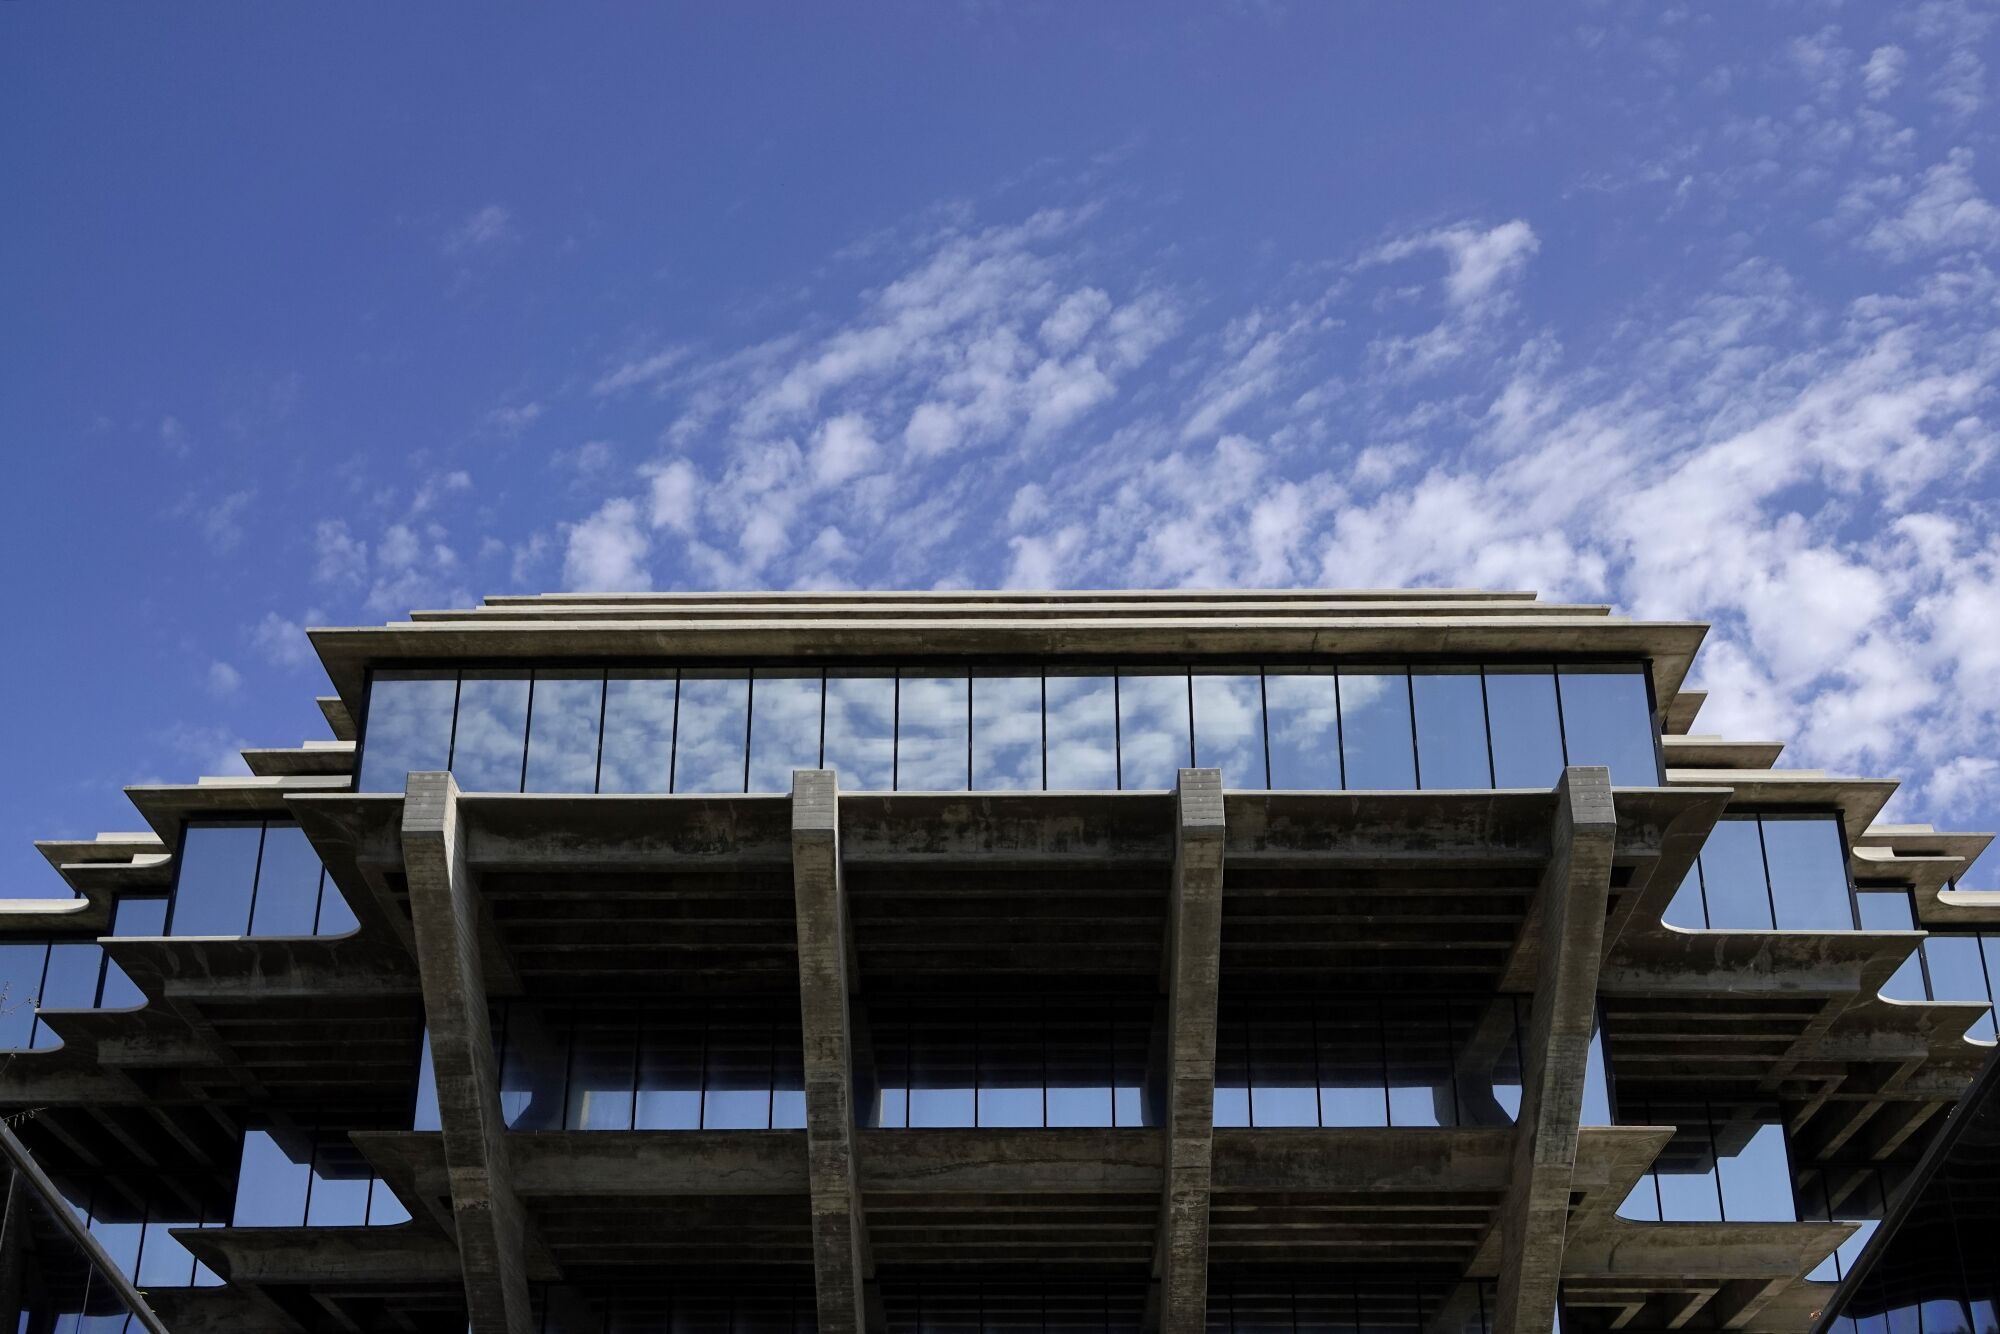 UC San Diego's Geisel Library, which is celebrating its 50th anniversary, remains closed in in-person visitations.